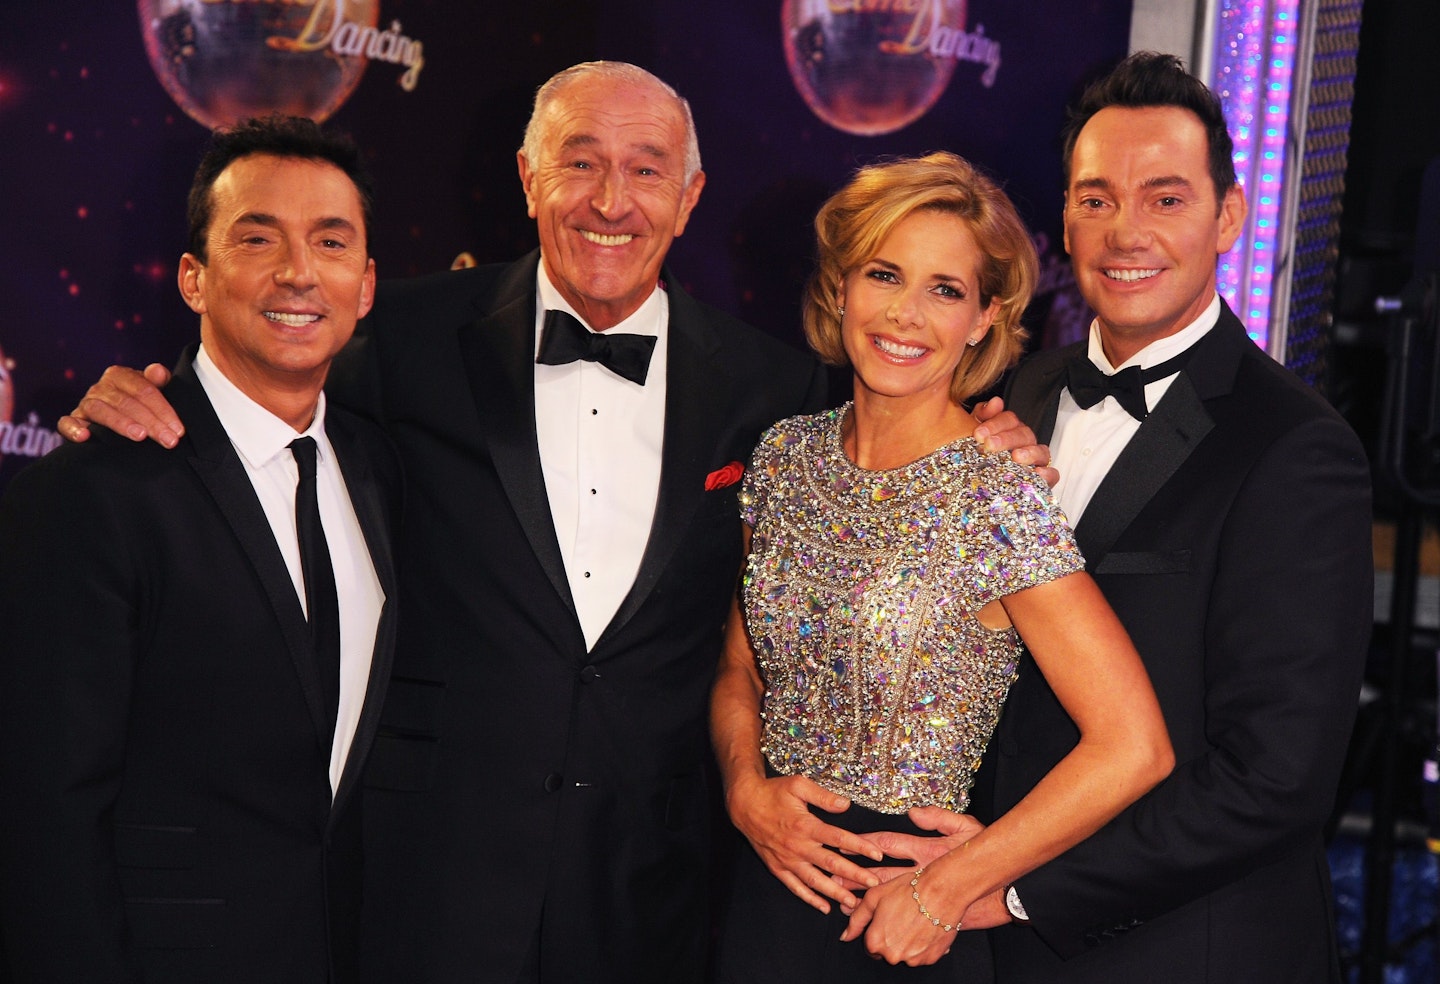 strictly-come-dancing-new-judge-shirley-ballas-len-goodman-replacement